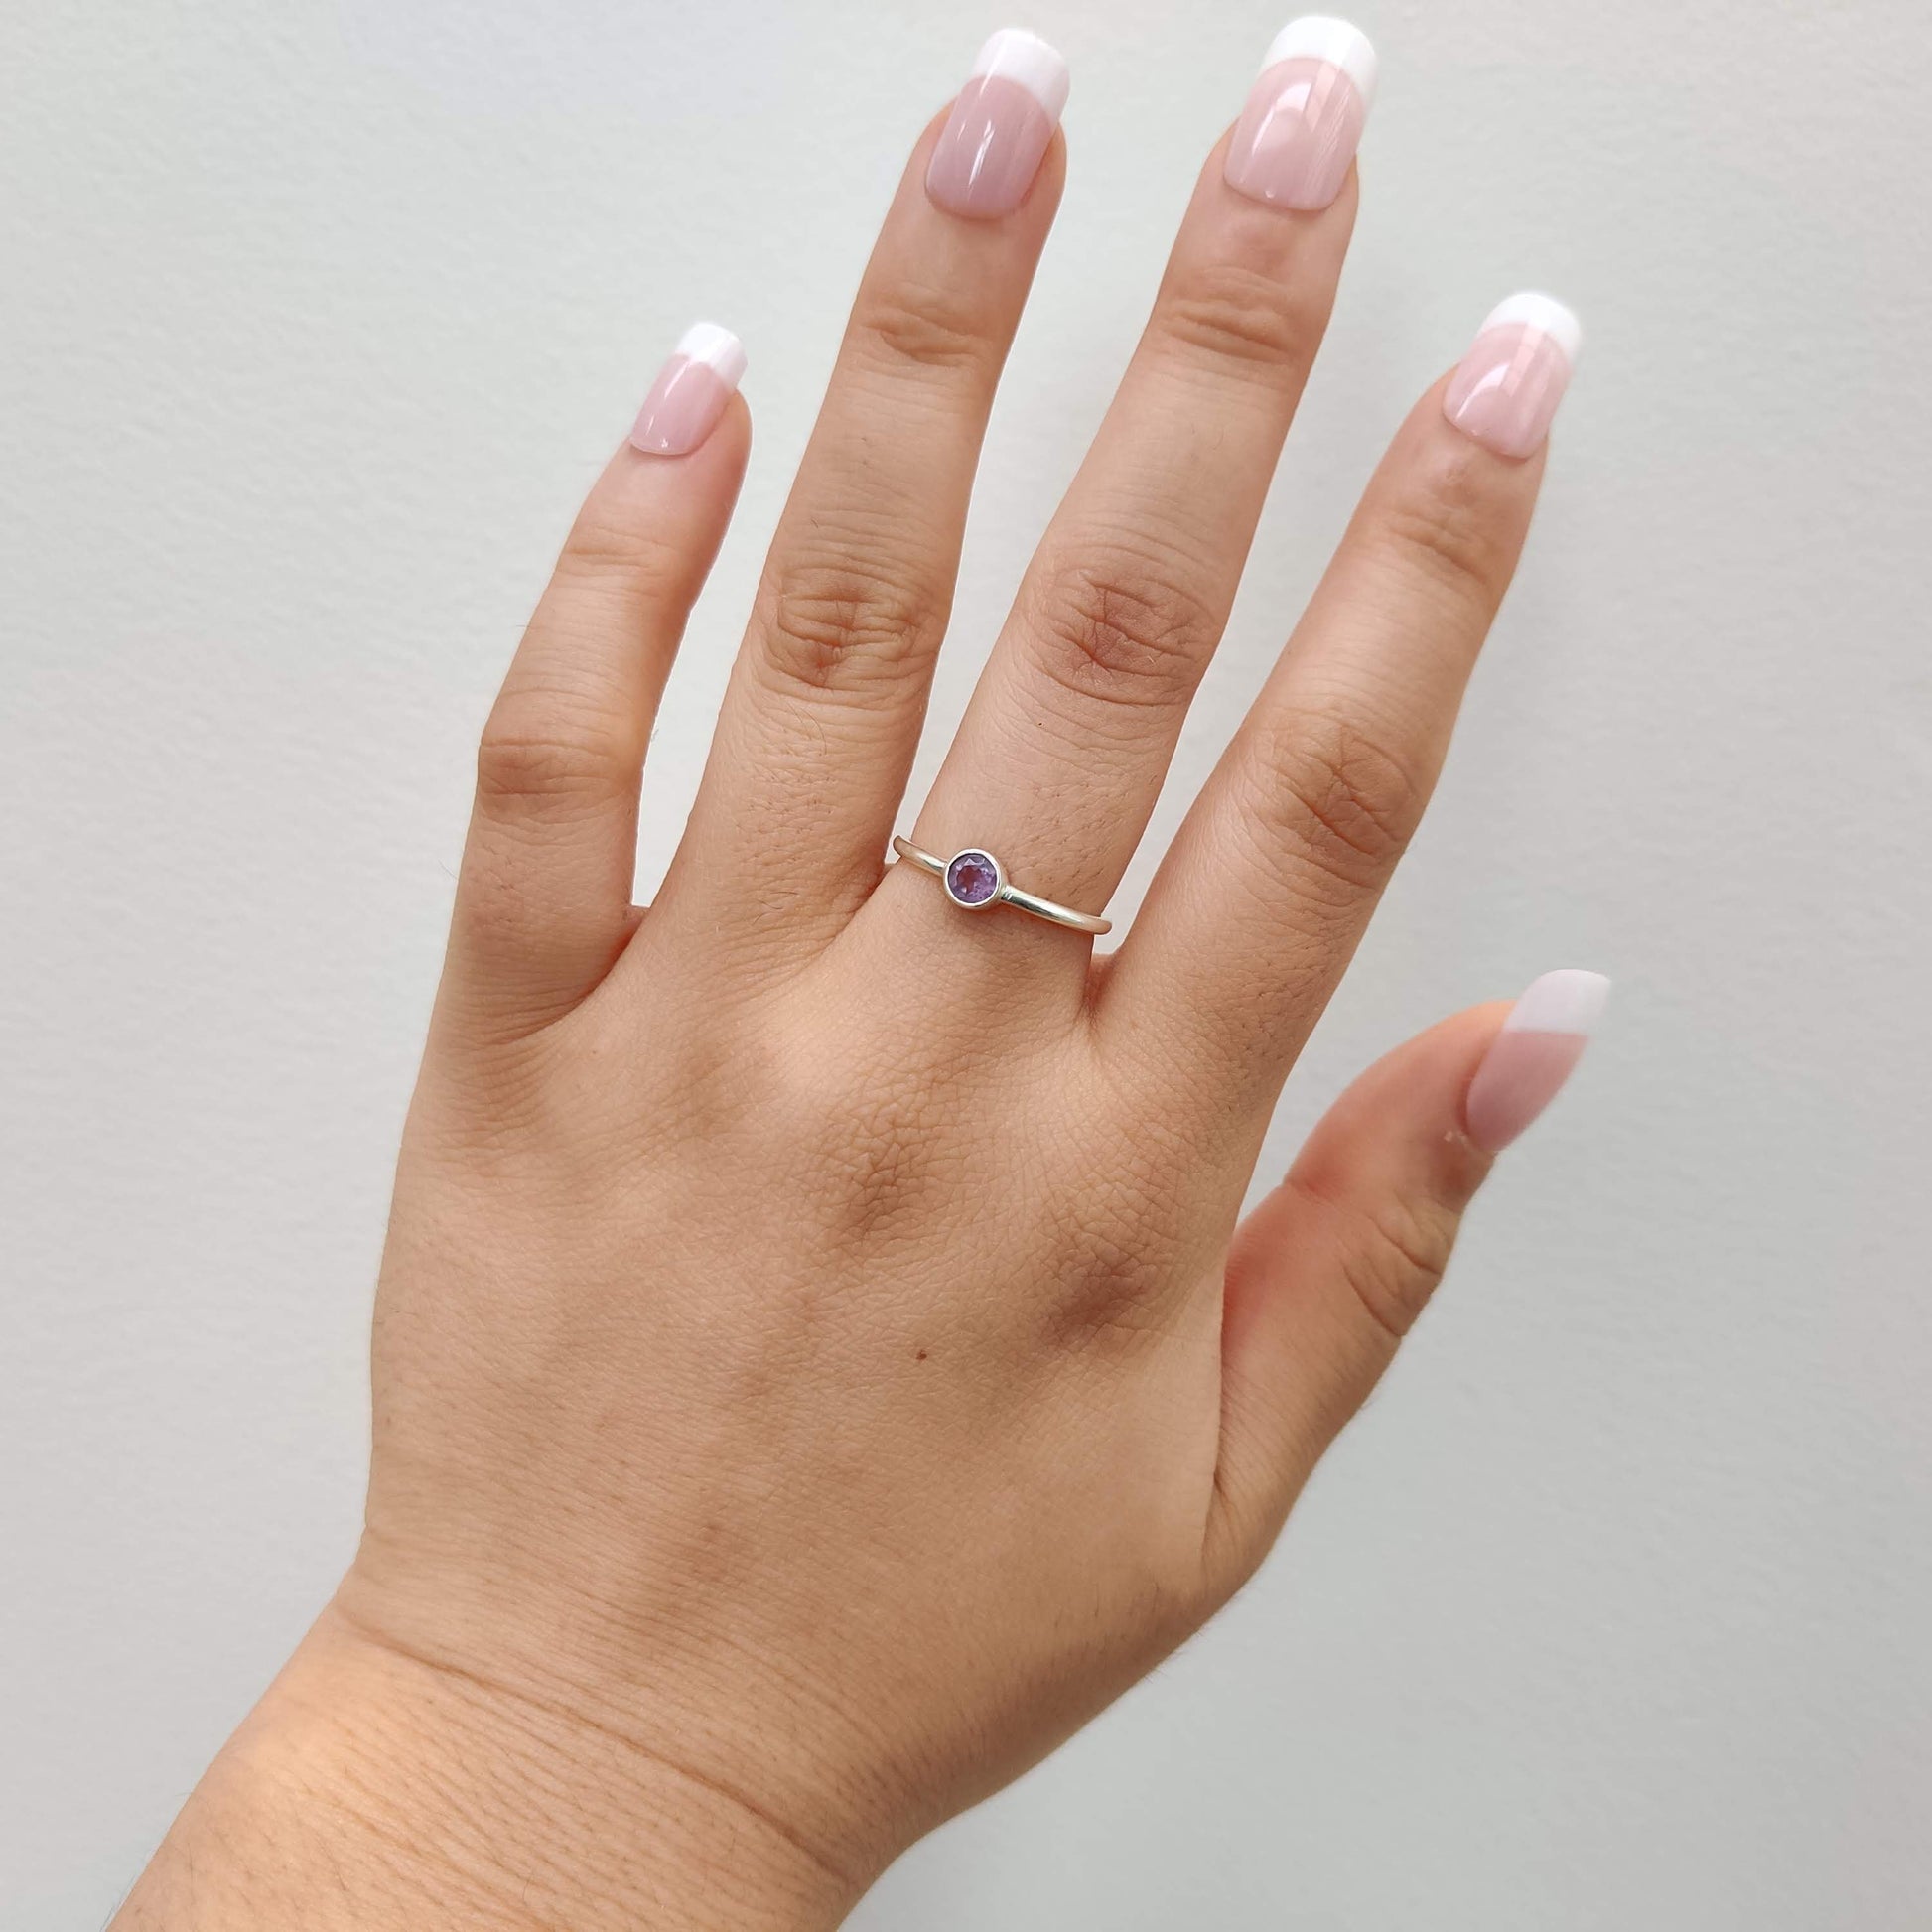 Amethyst Delicate 925 Sterling Silver Ring - Rivendell Shop